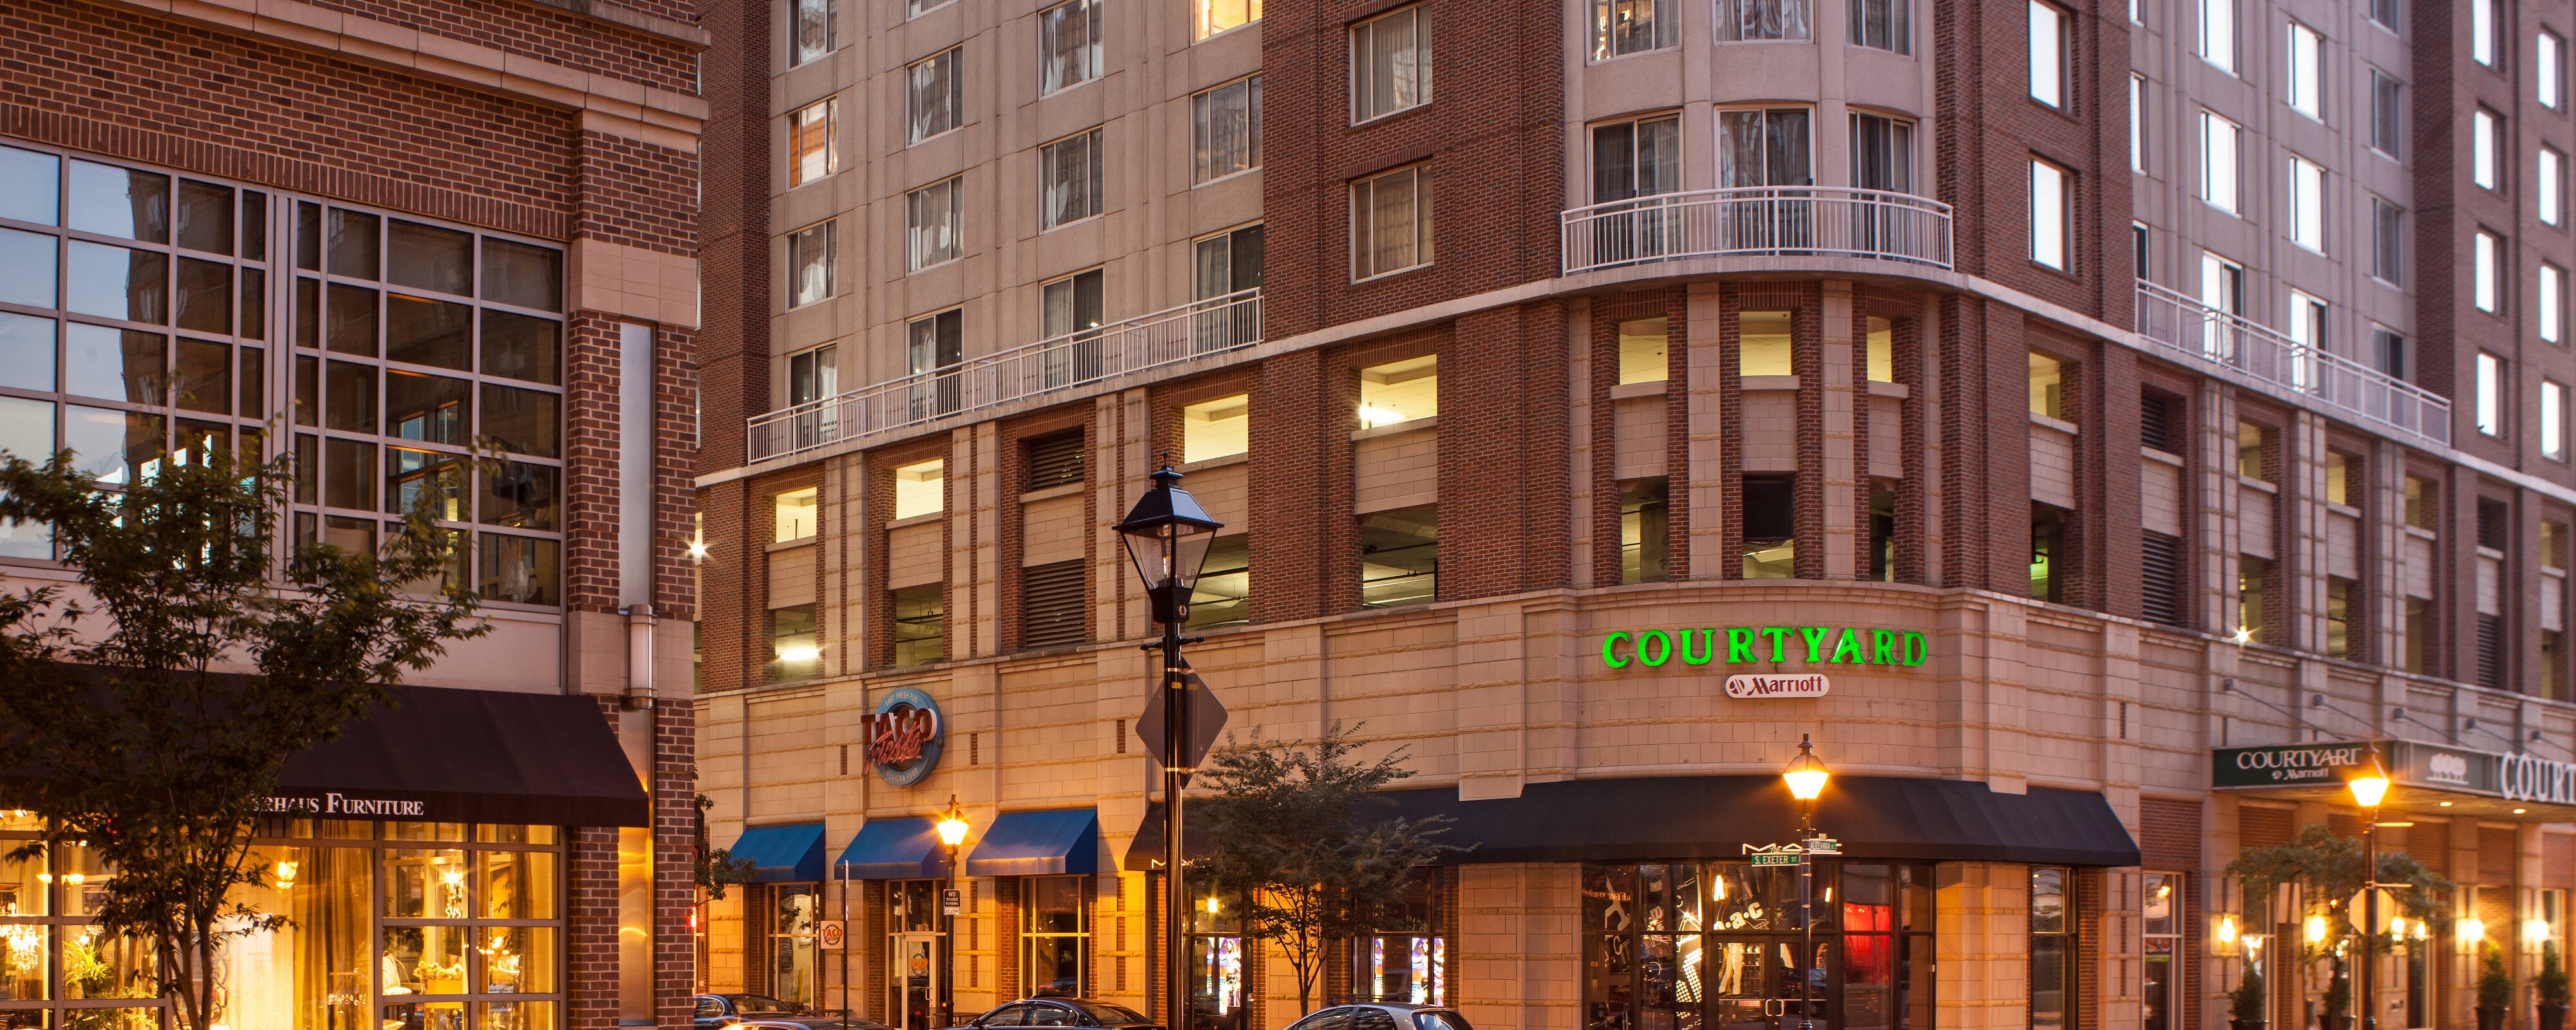 Downtown Hotels in Baltimore, MD | Courtyard Baltimore Downtown/Inner